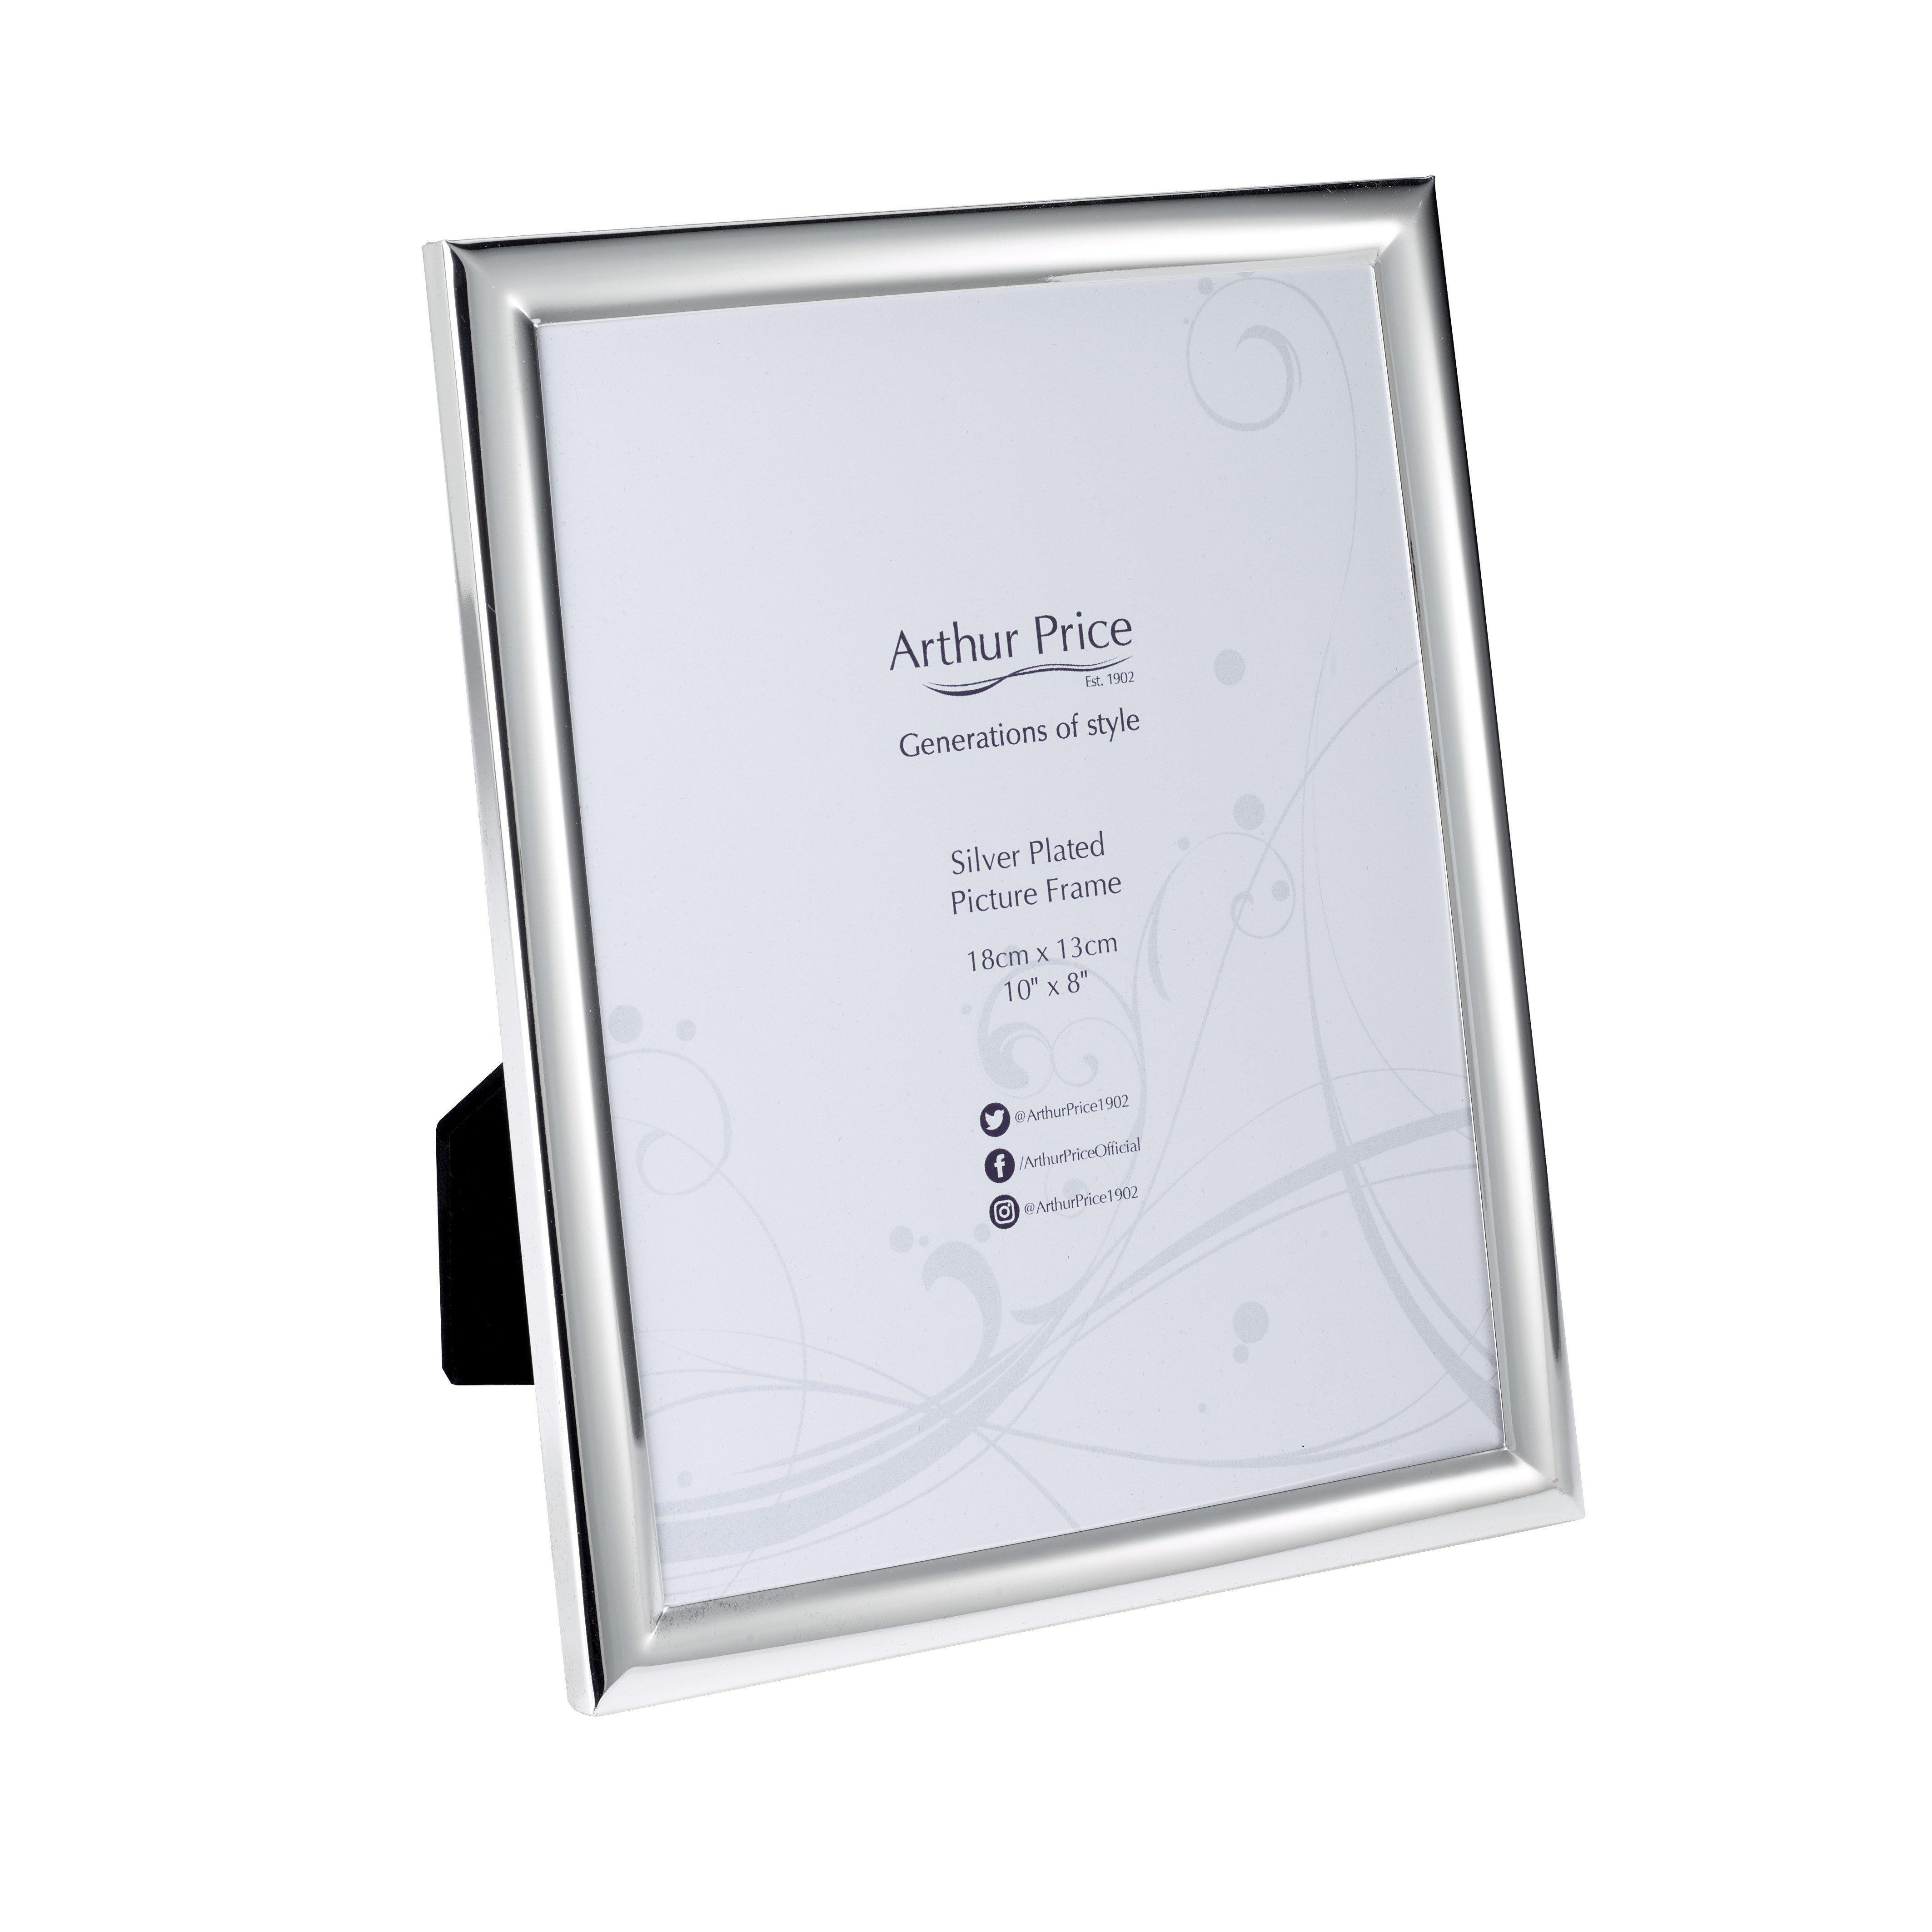 'Plain' Silver Plated Photo Frame 10 x 8 Inch with 9 x 7 Inch Aperture Size